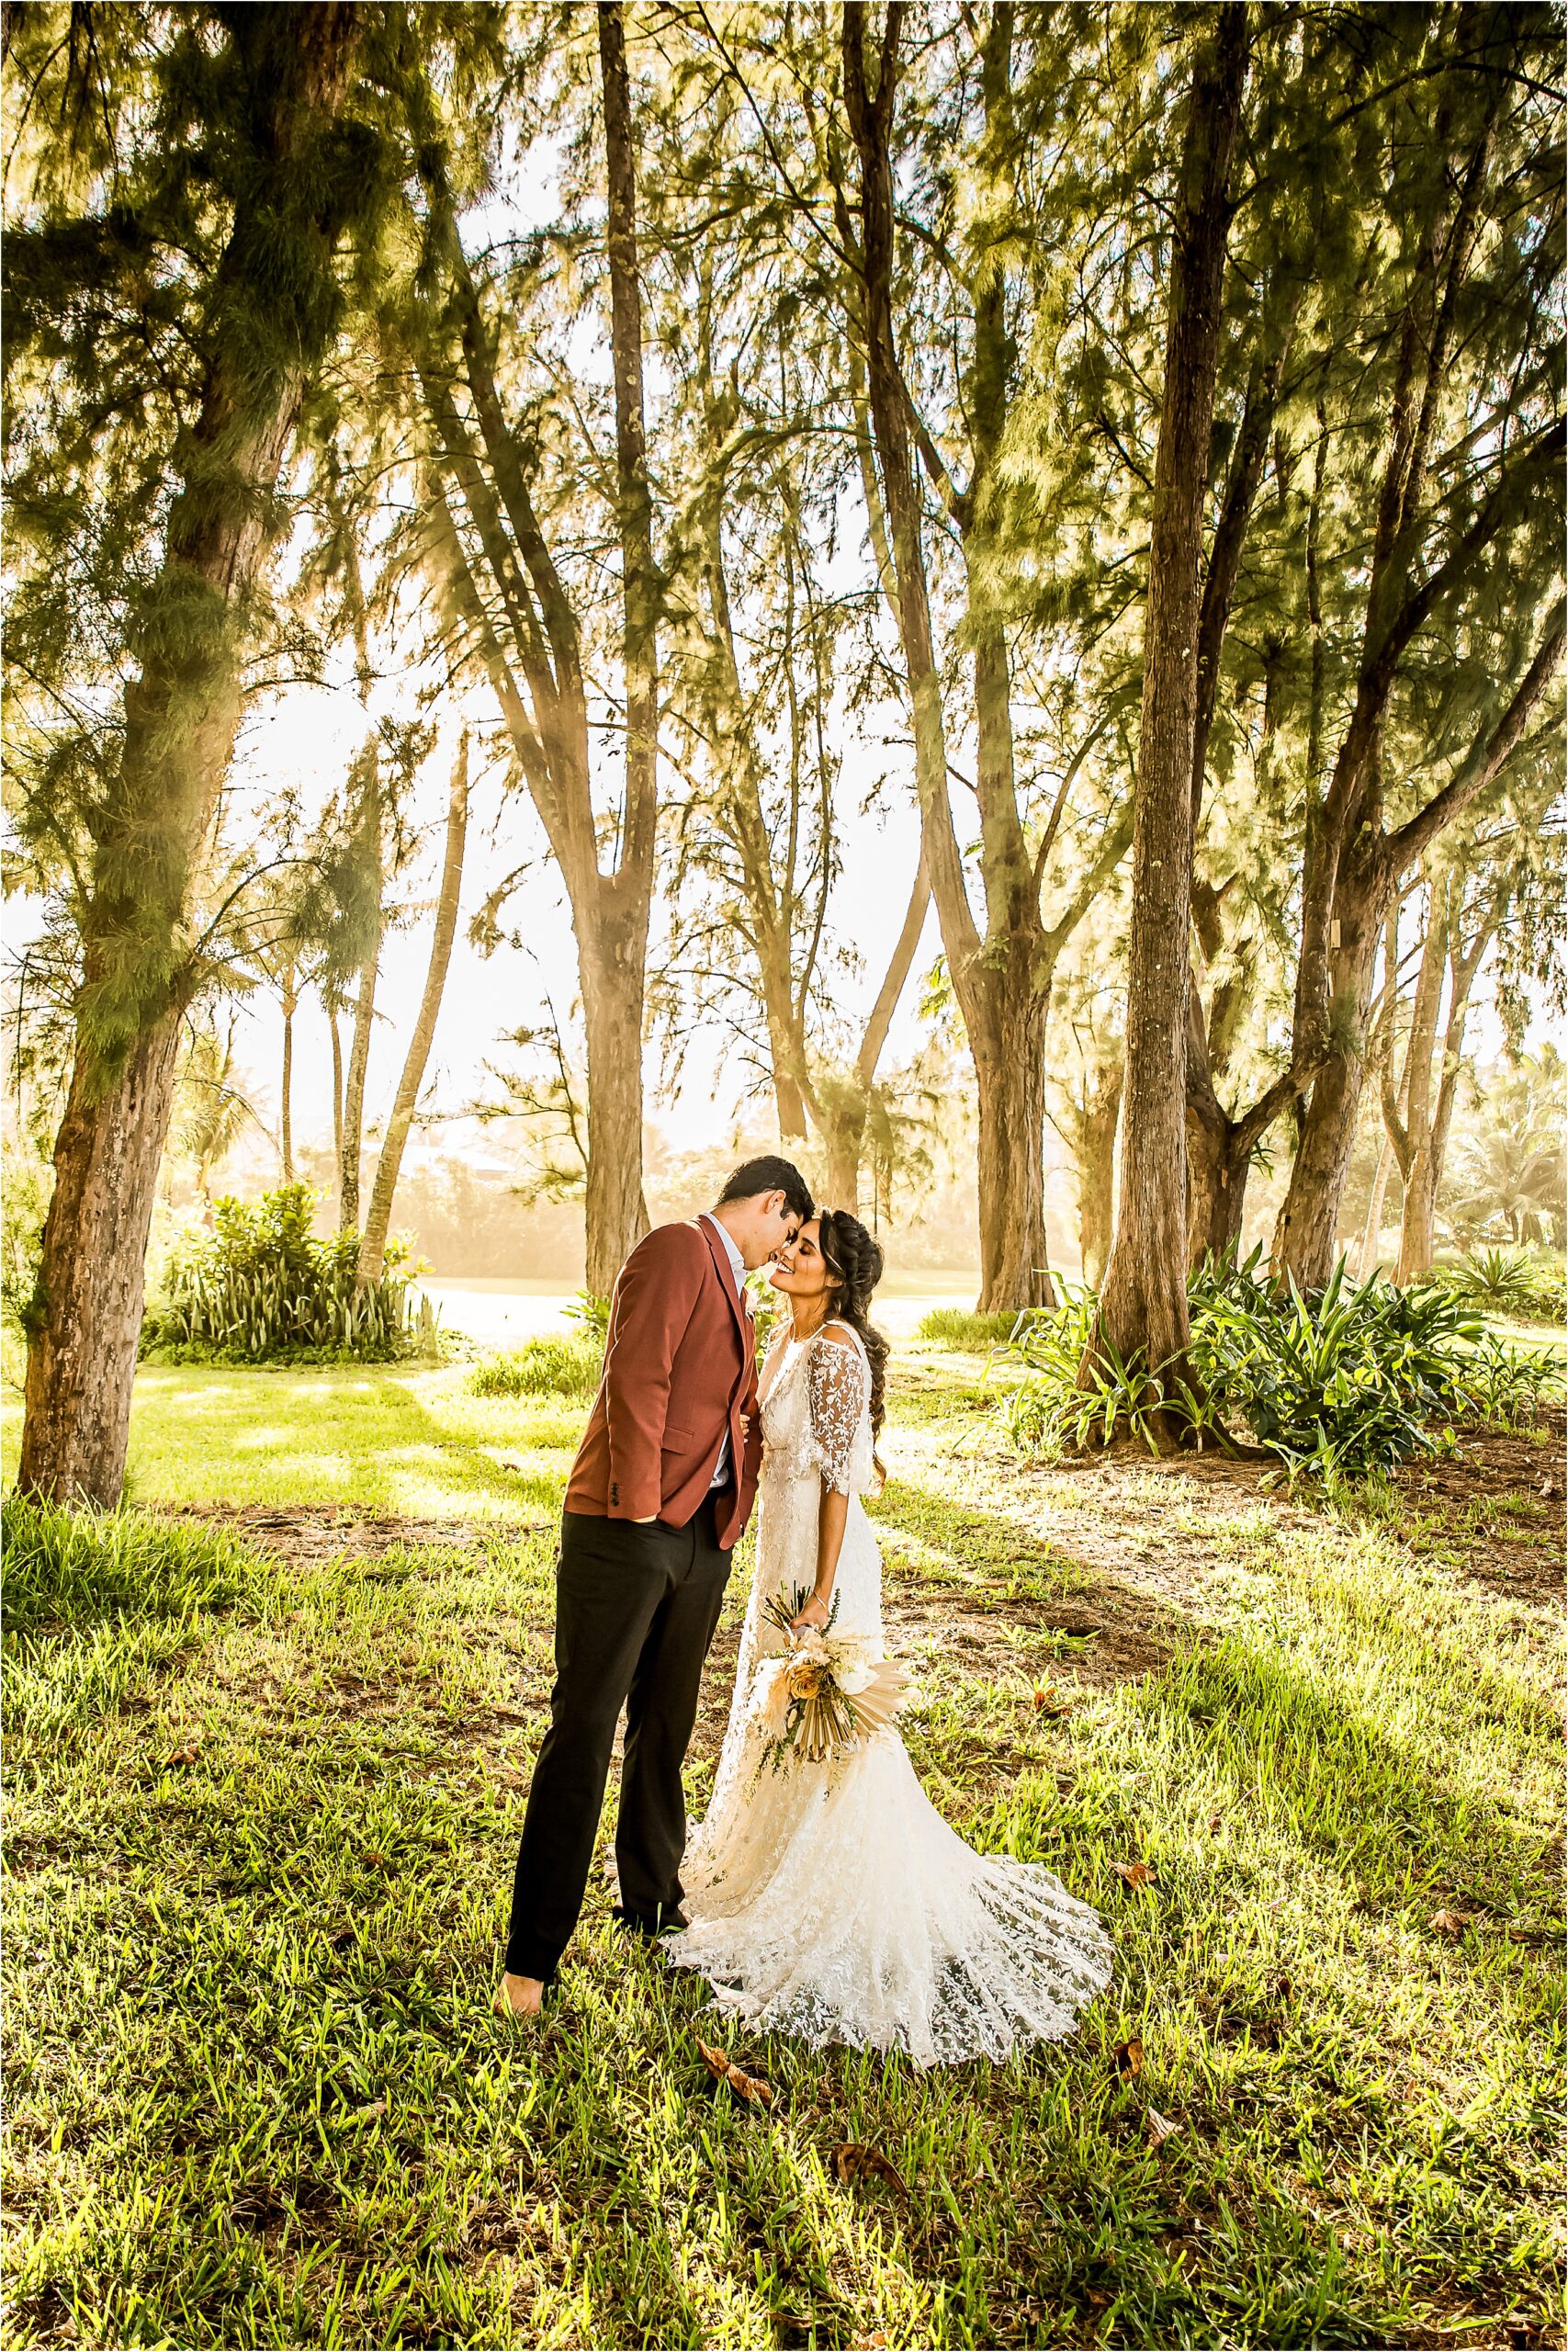 man and woman forehead to forehead in wedding attire with trees in the background